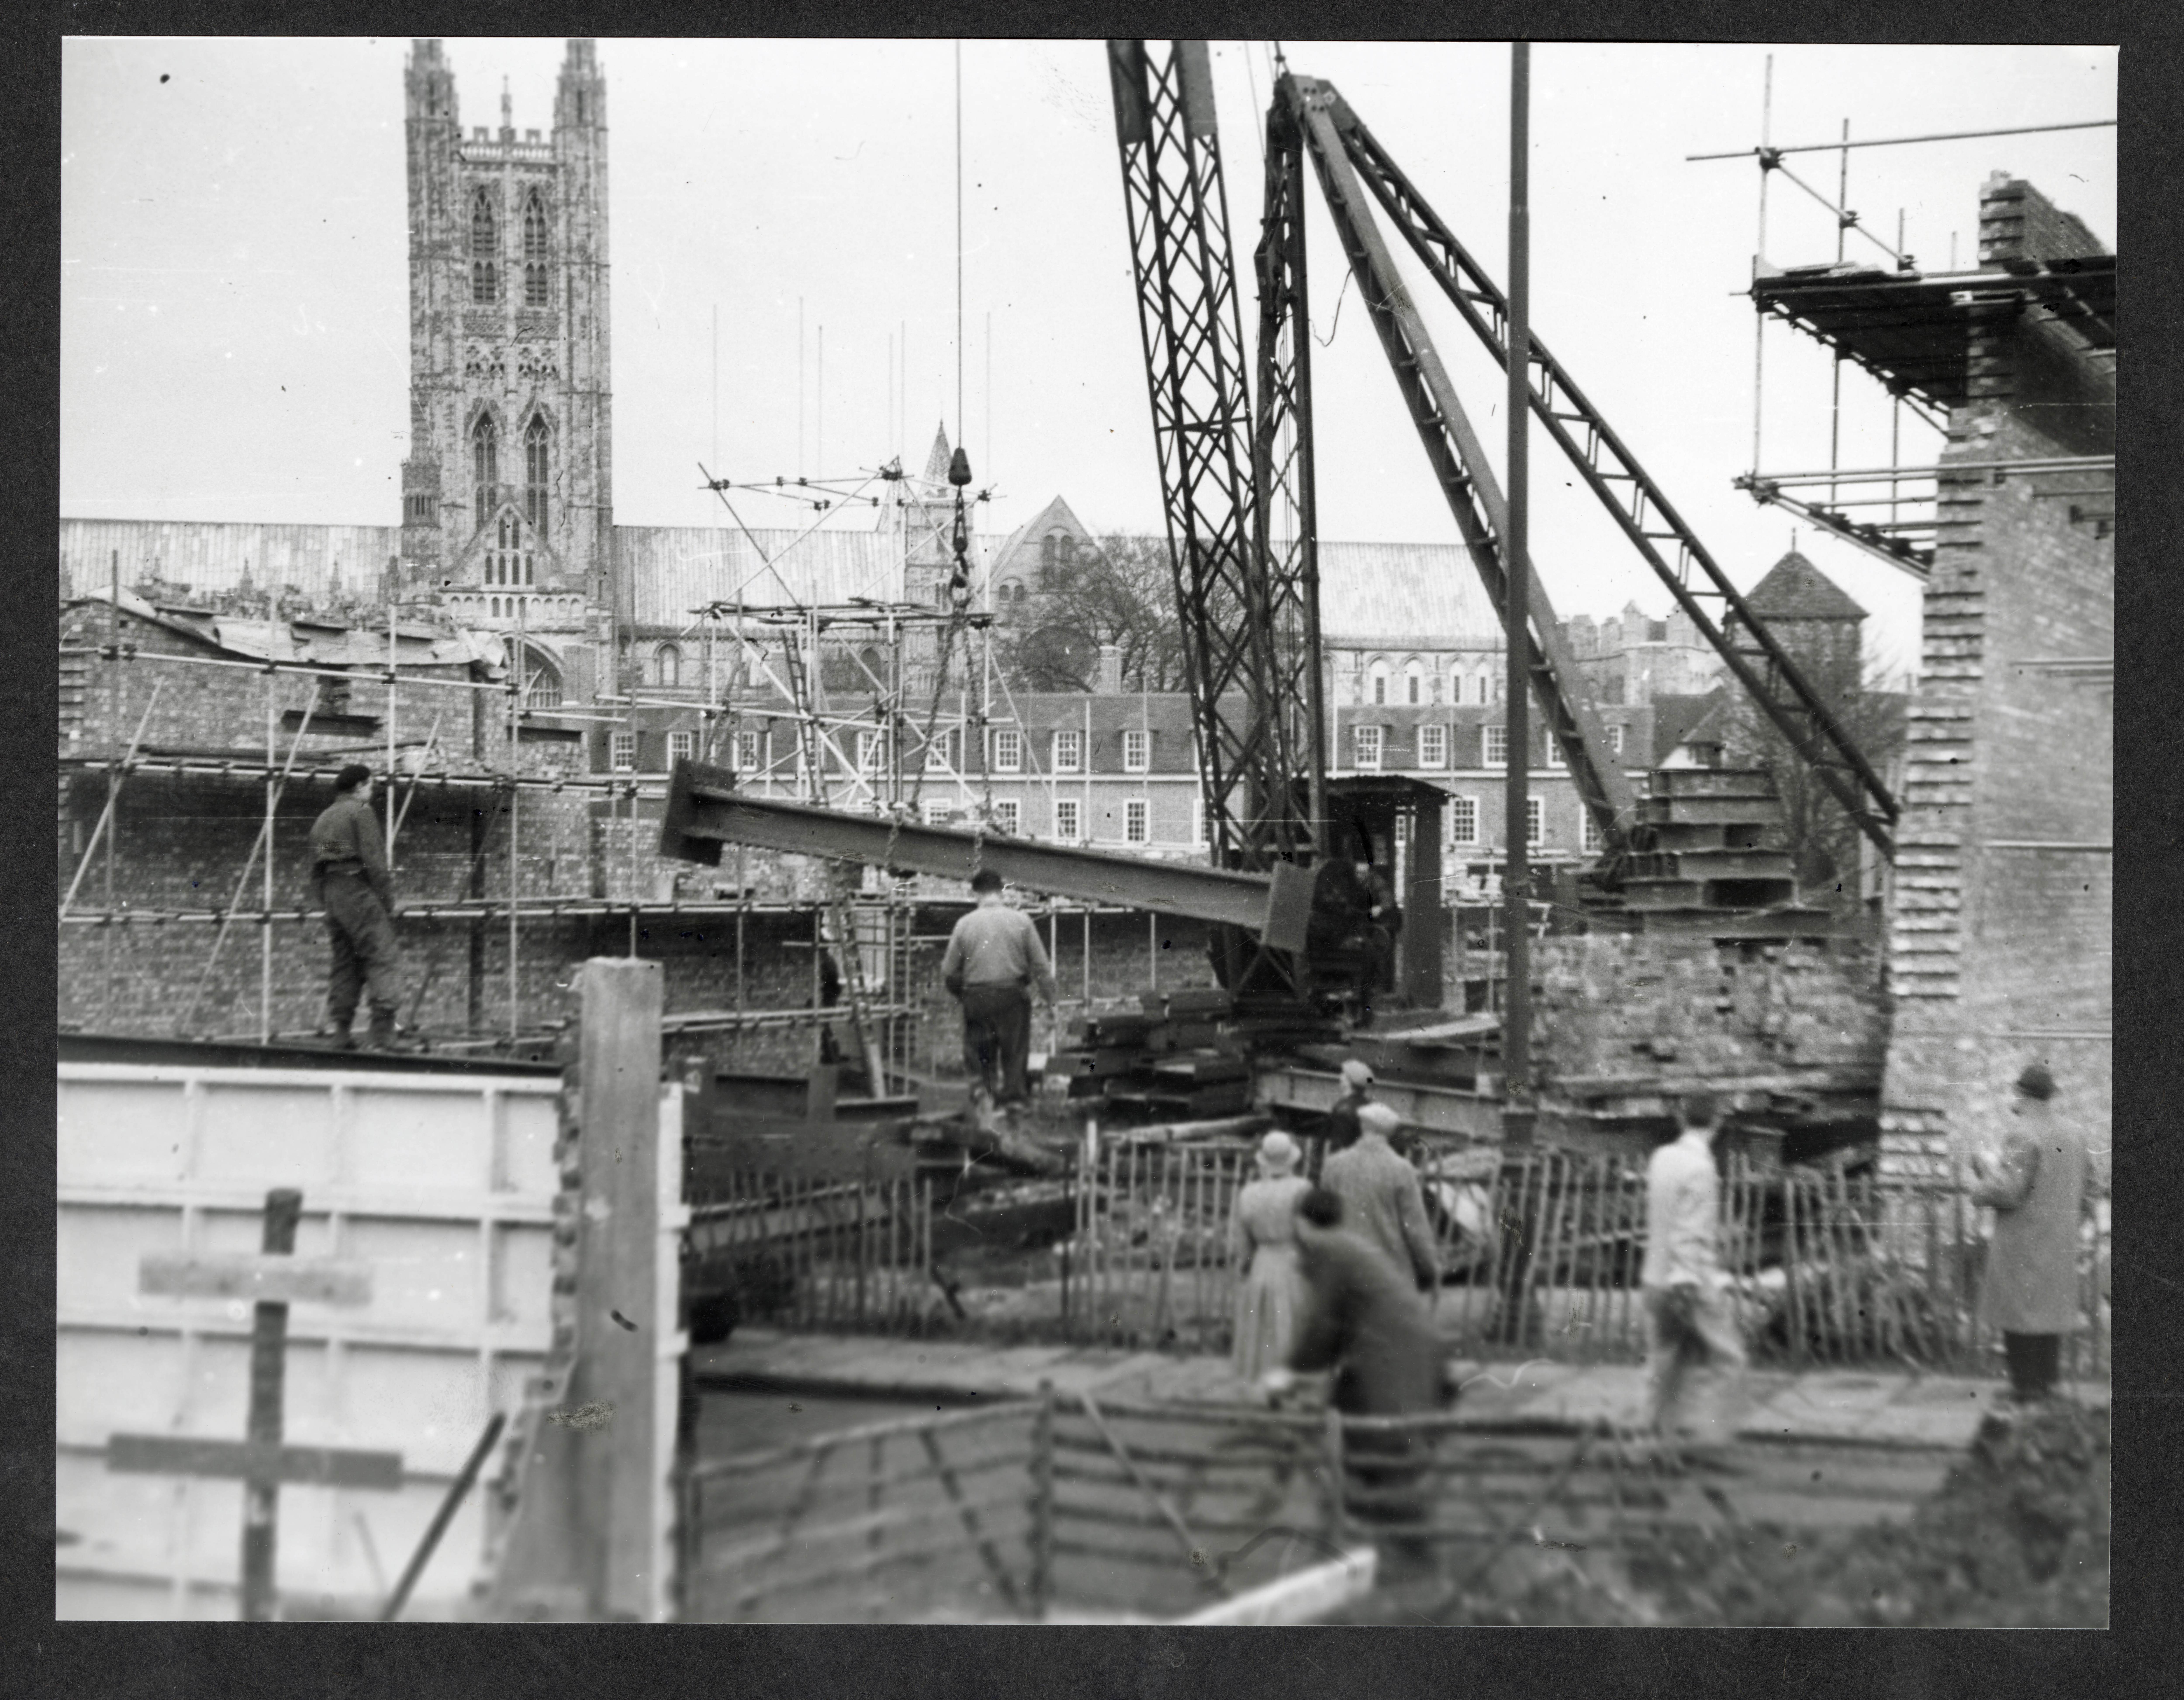 Canterbury being rebuilt after the Blitz! Canterbury Photographs Collection, LH/CANT/PHO 